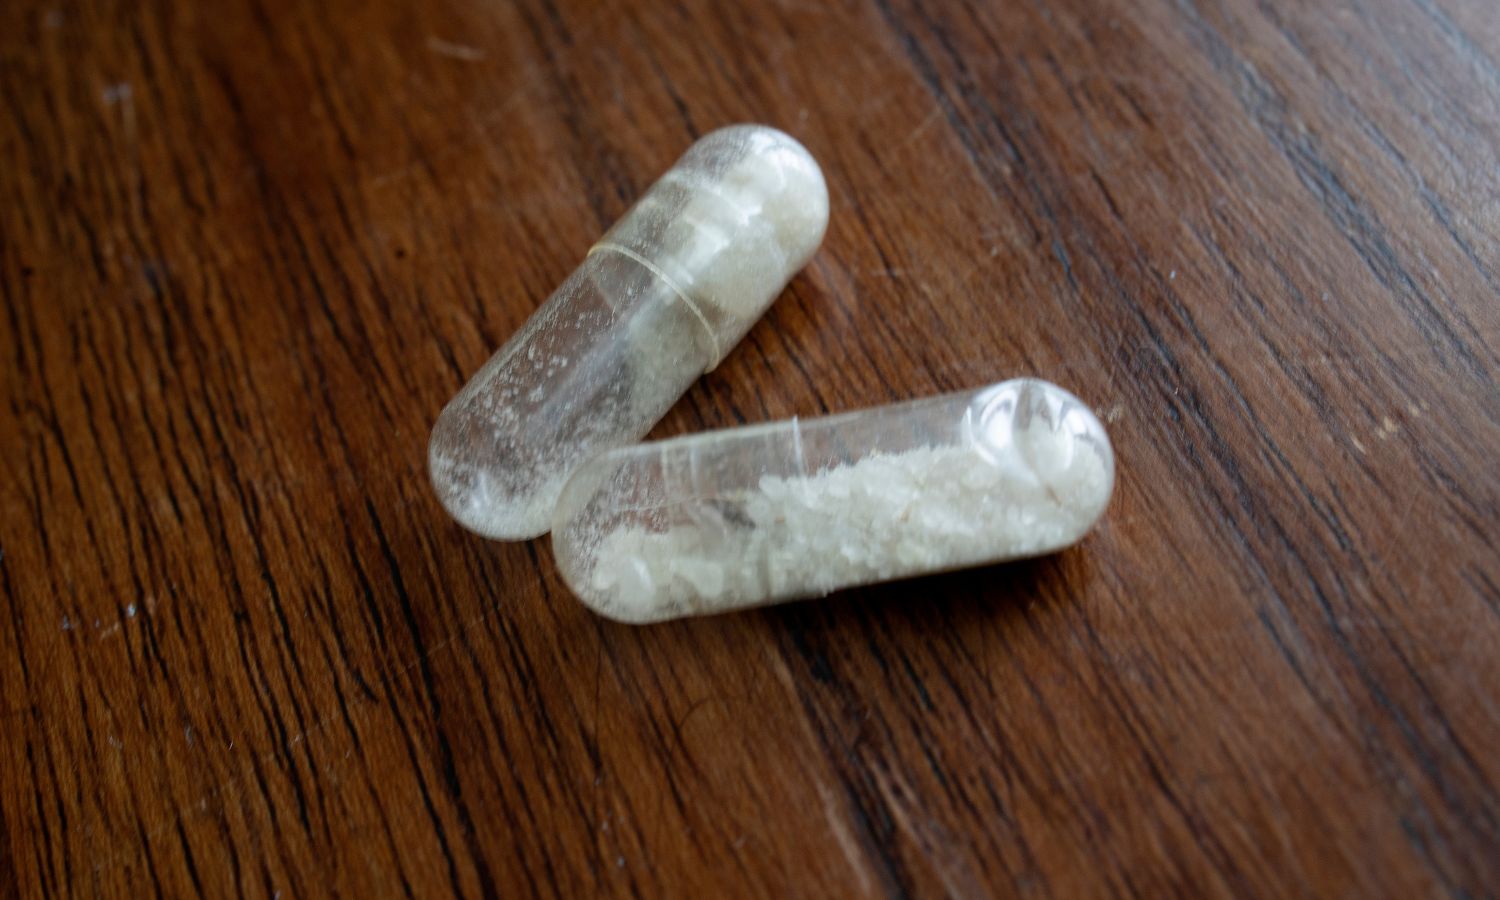 An image showing MDMA capsules to illustrate MDMA therapy in Australia